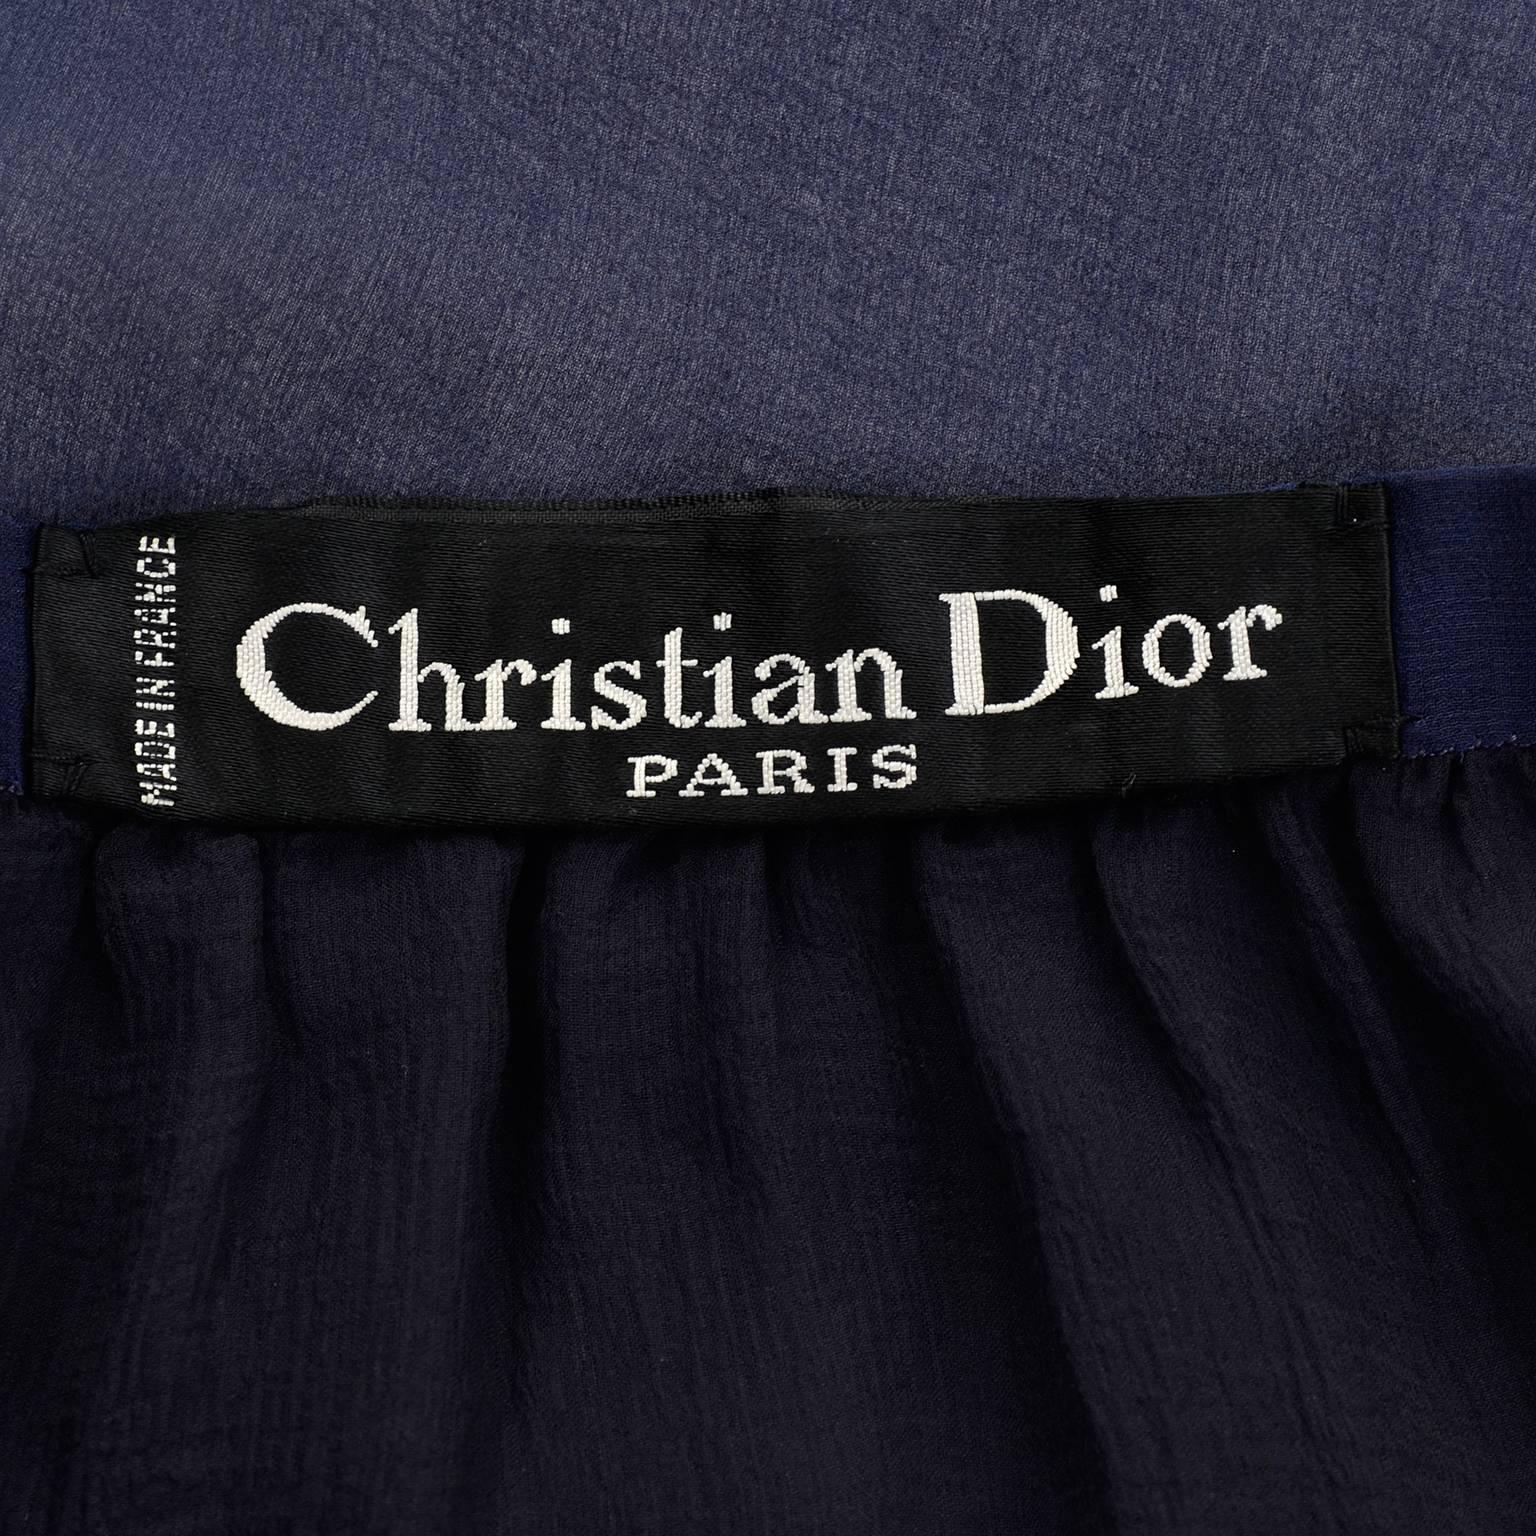 Vintage Christian Dior Haute Couture Dress Numbered in Navy Blue Silk Chiffon XS In Excellent Condition For Sale In Portland, OR